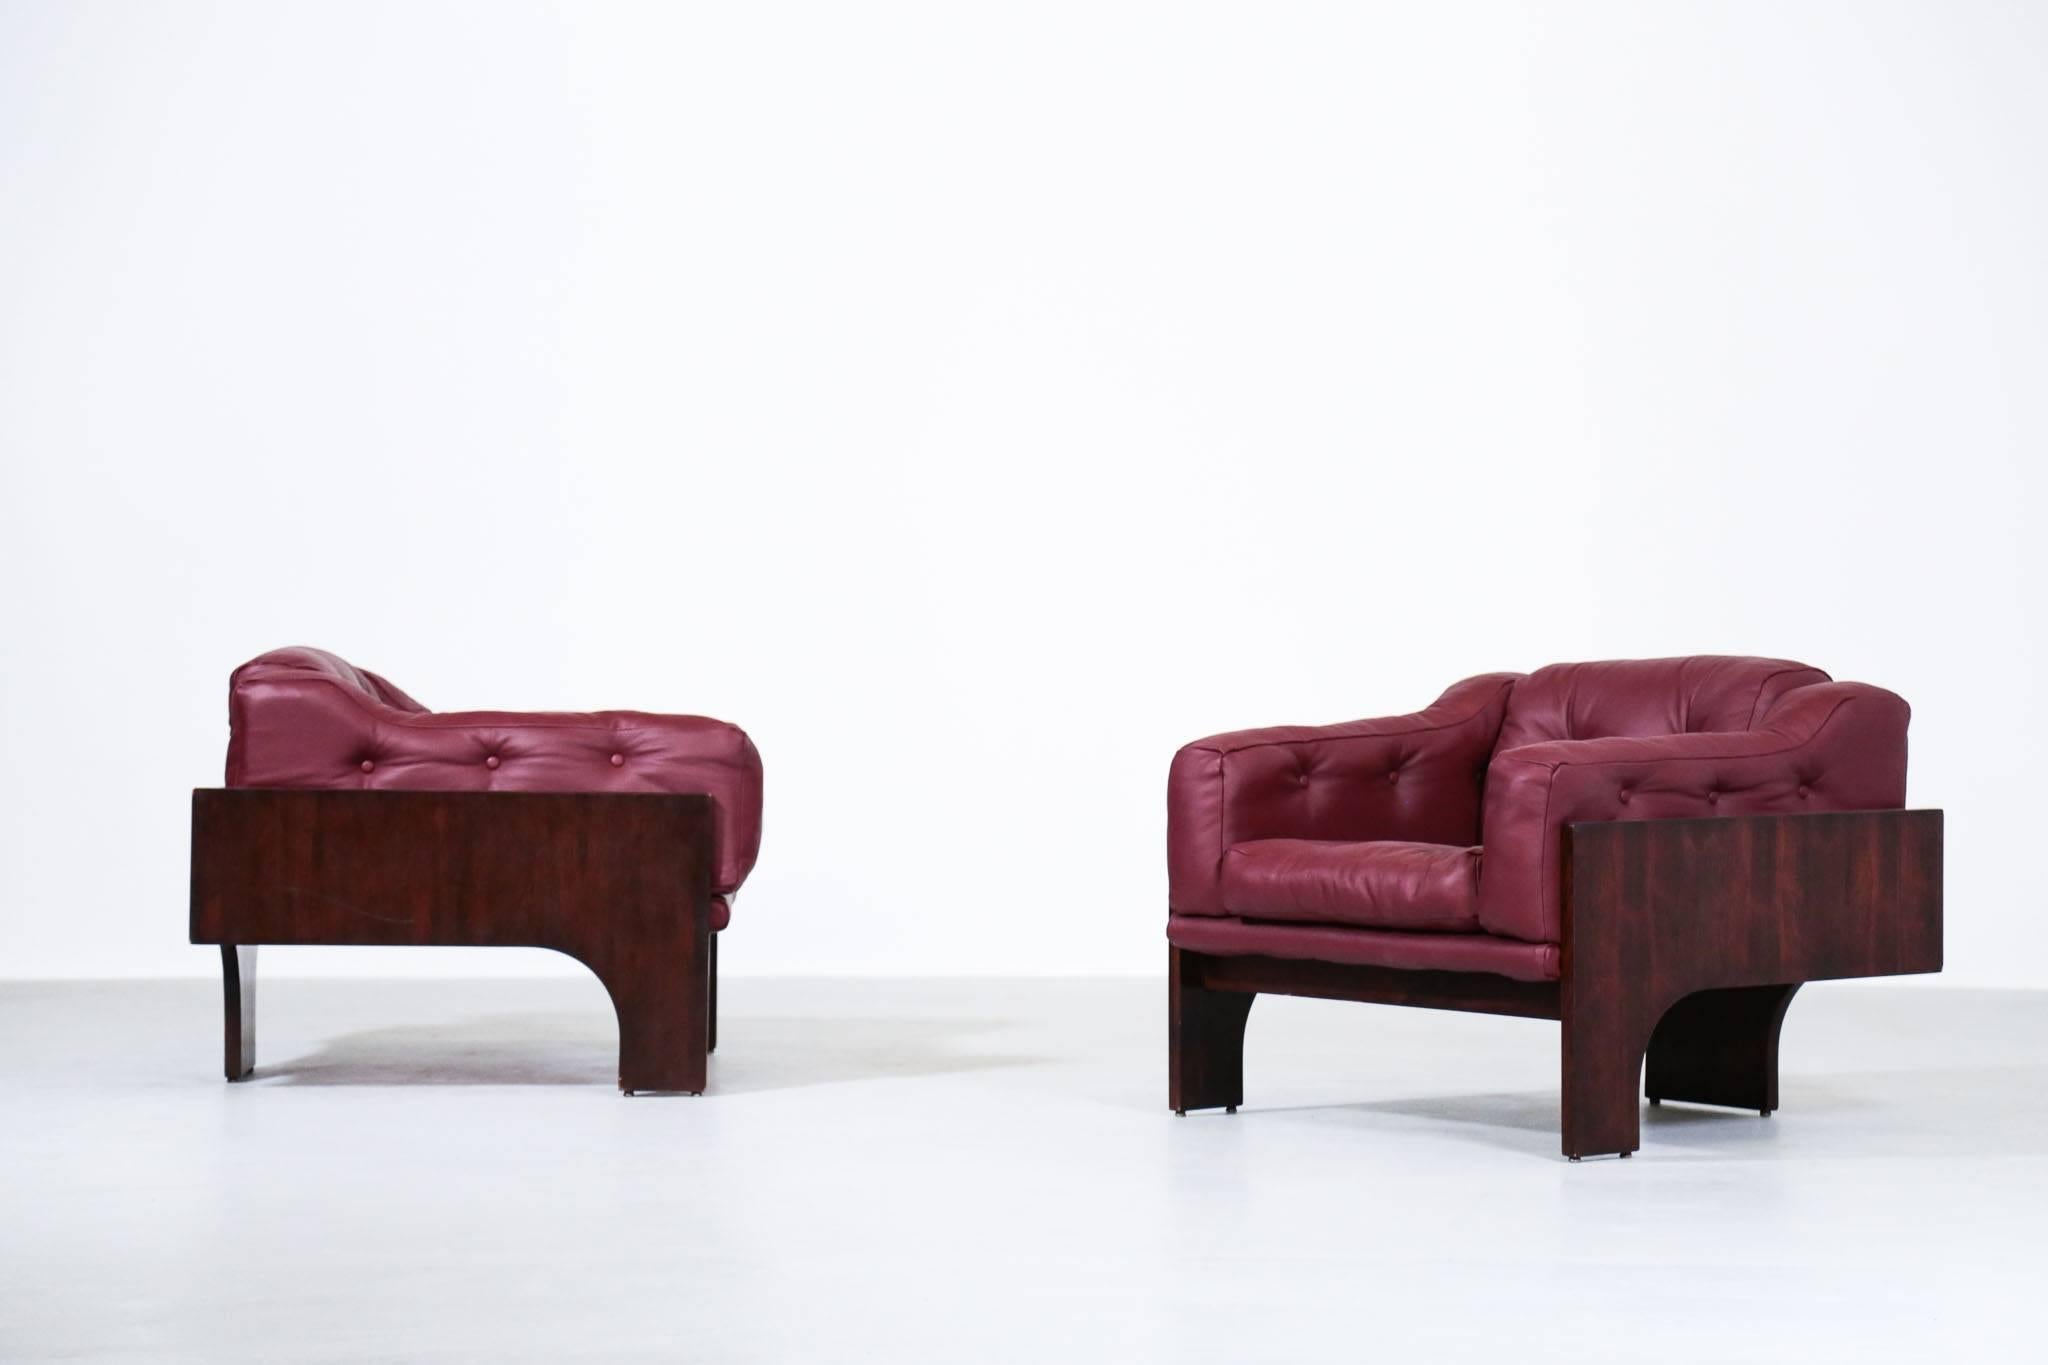 Italian Pair of Oriolo Armchairs by Claudio Salocchi for Sormani, Italy, 1966